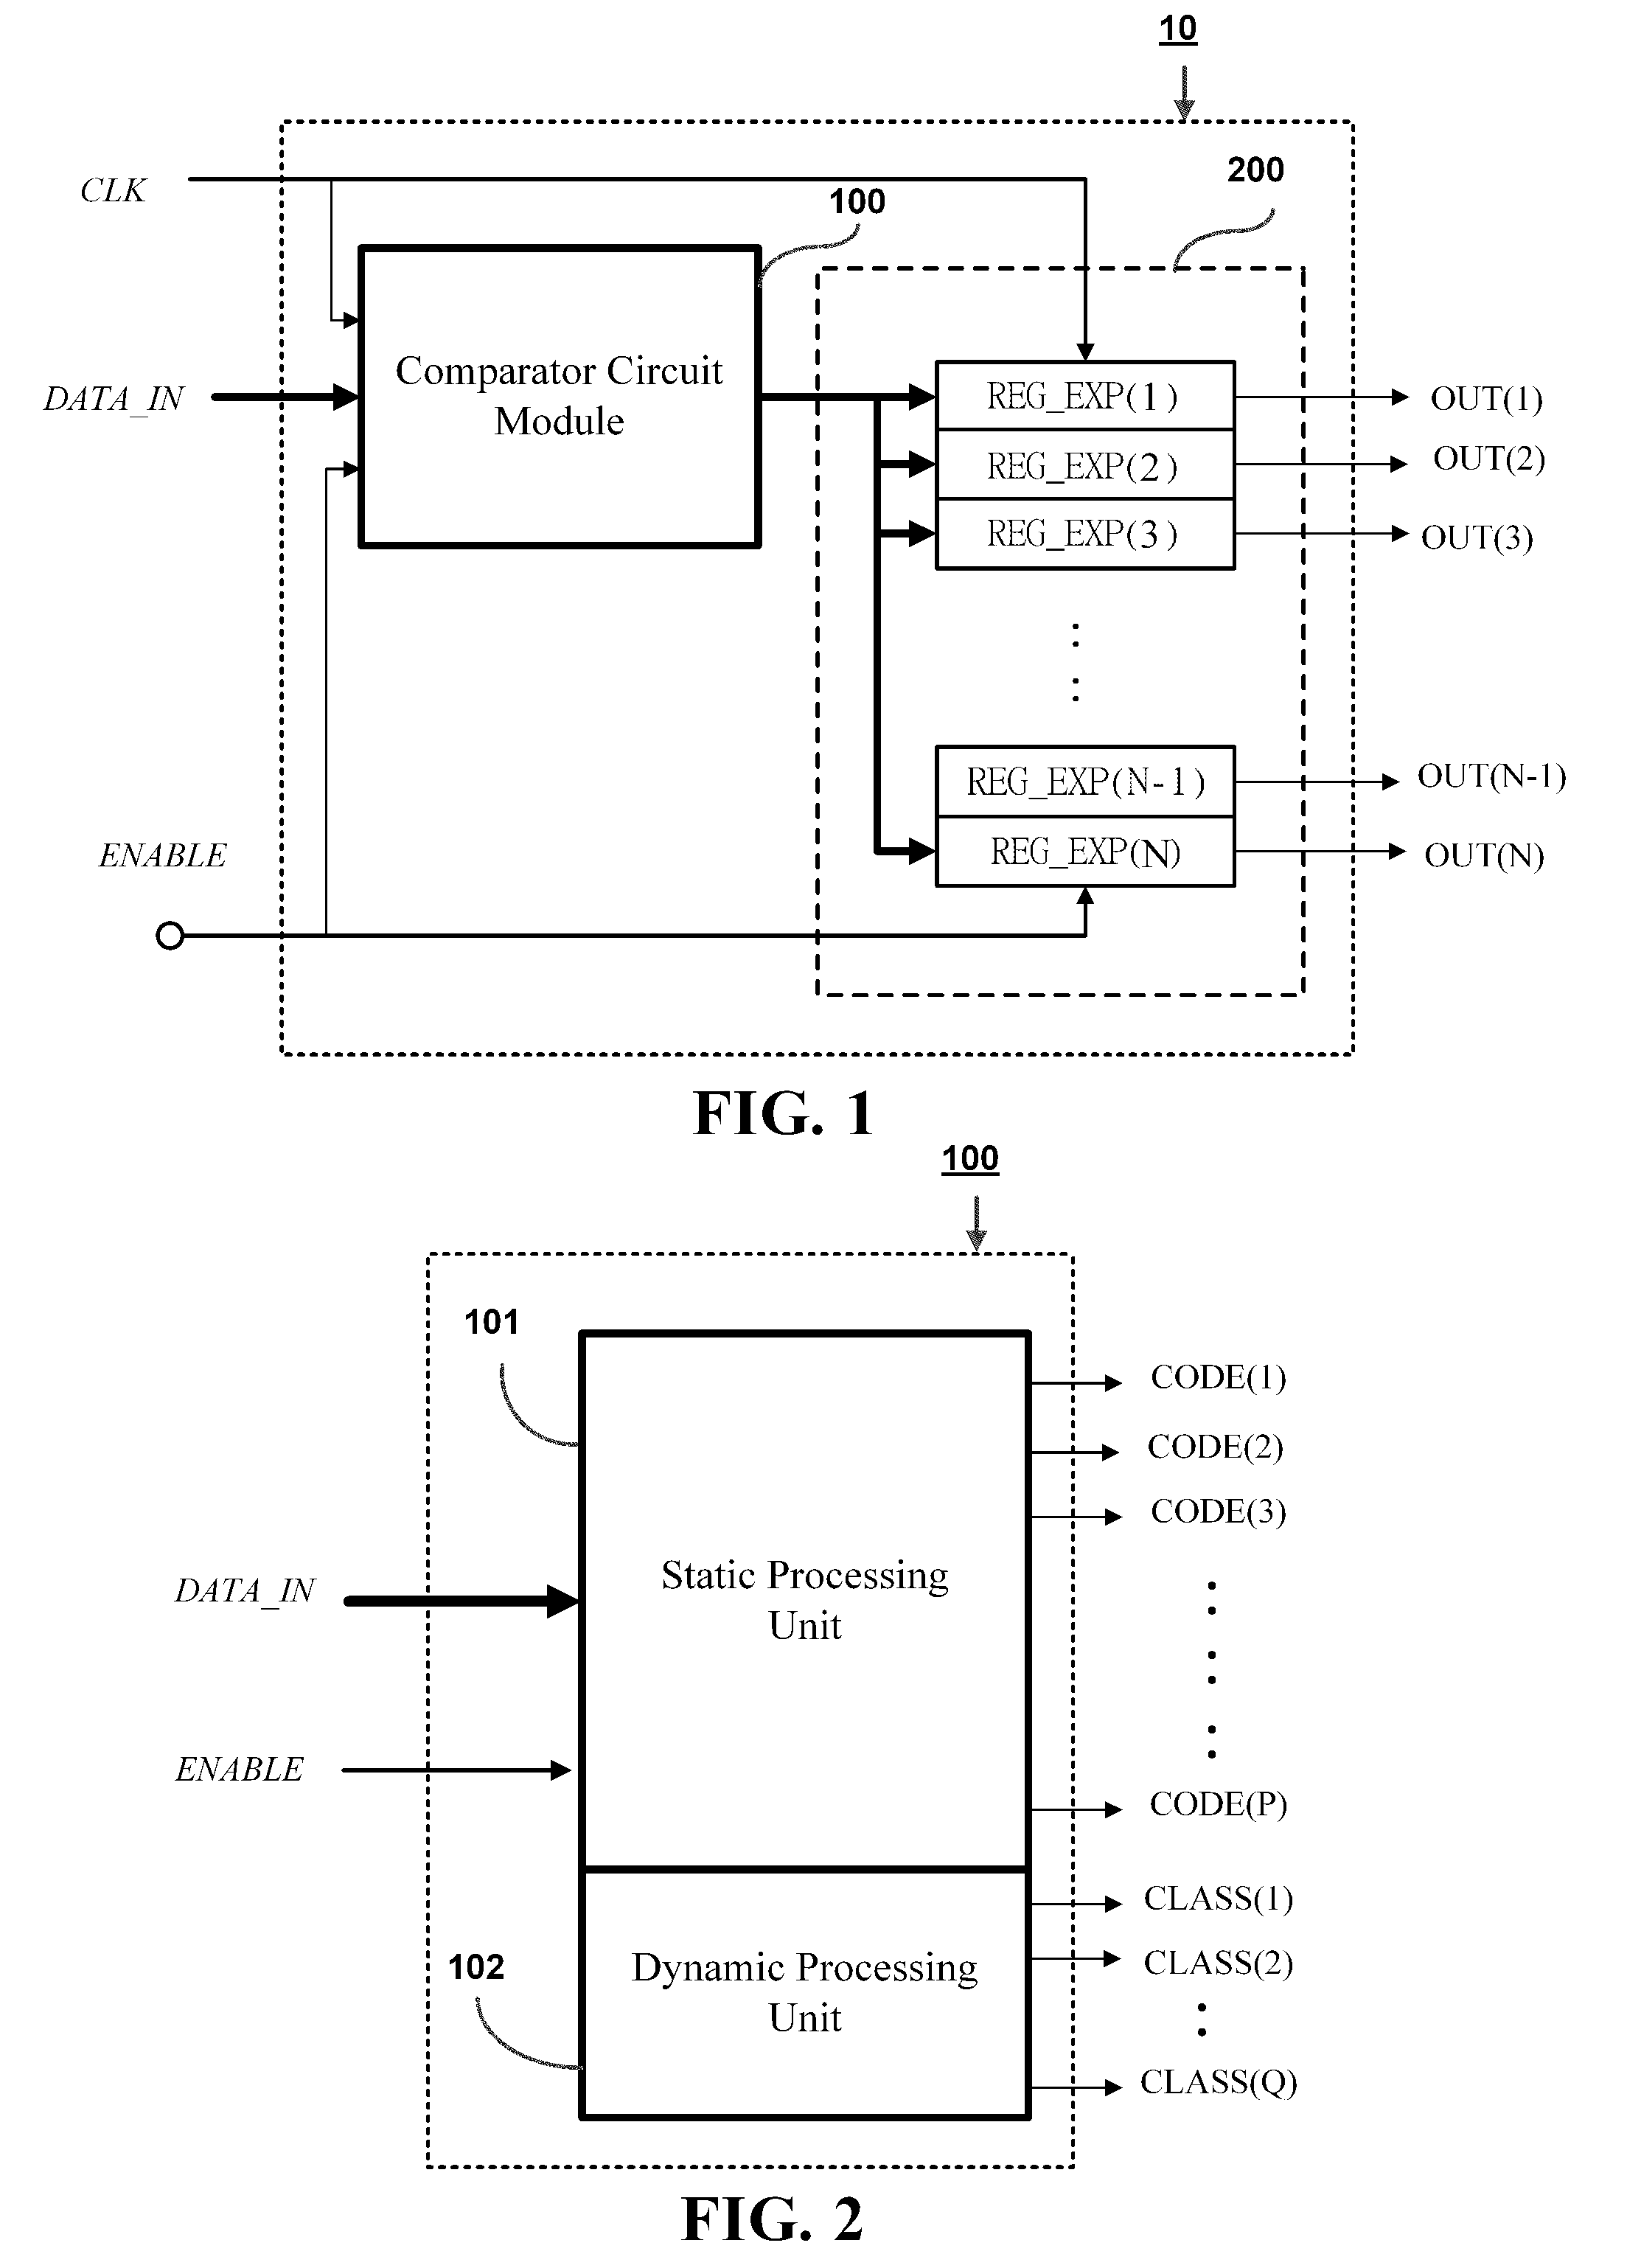 Regular expession pattern matching circuit based on a pipeline architecture